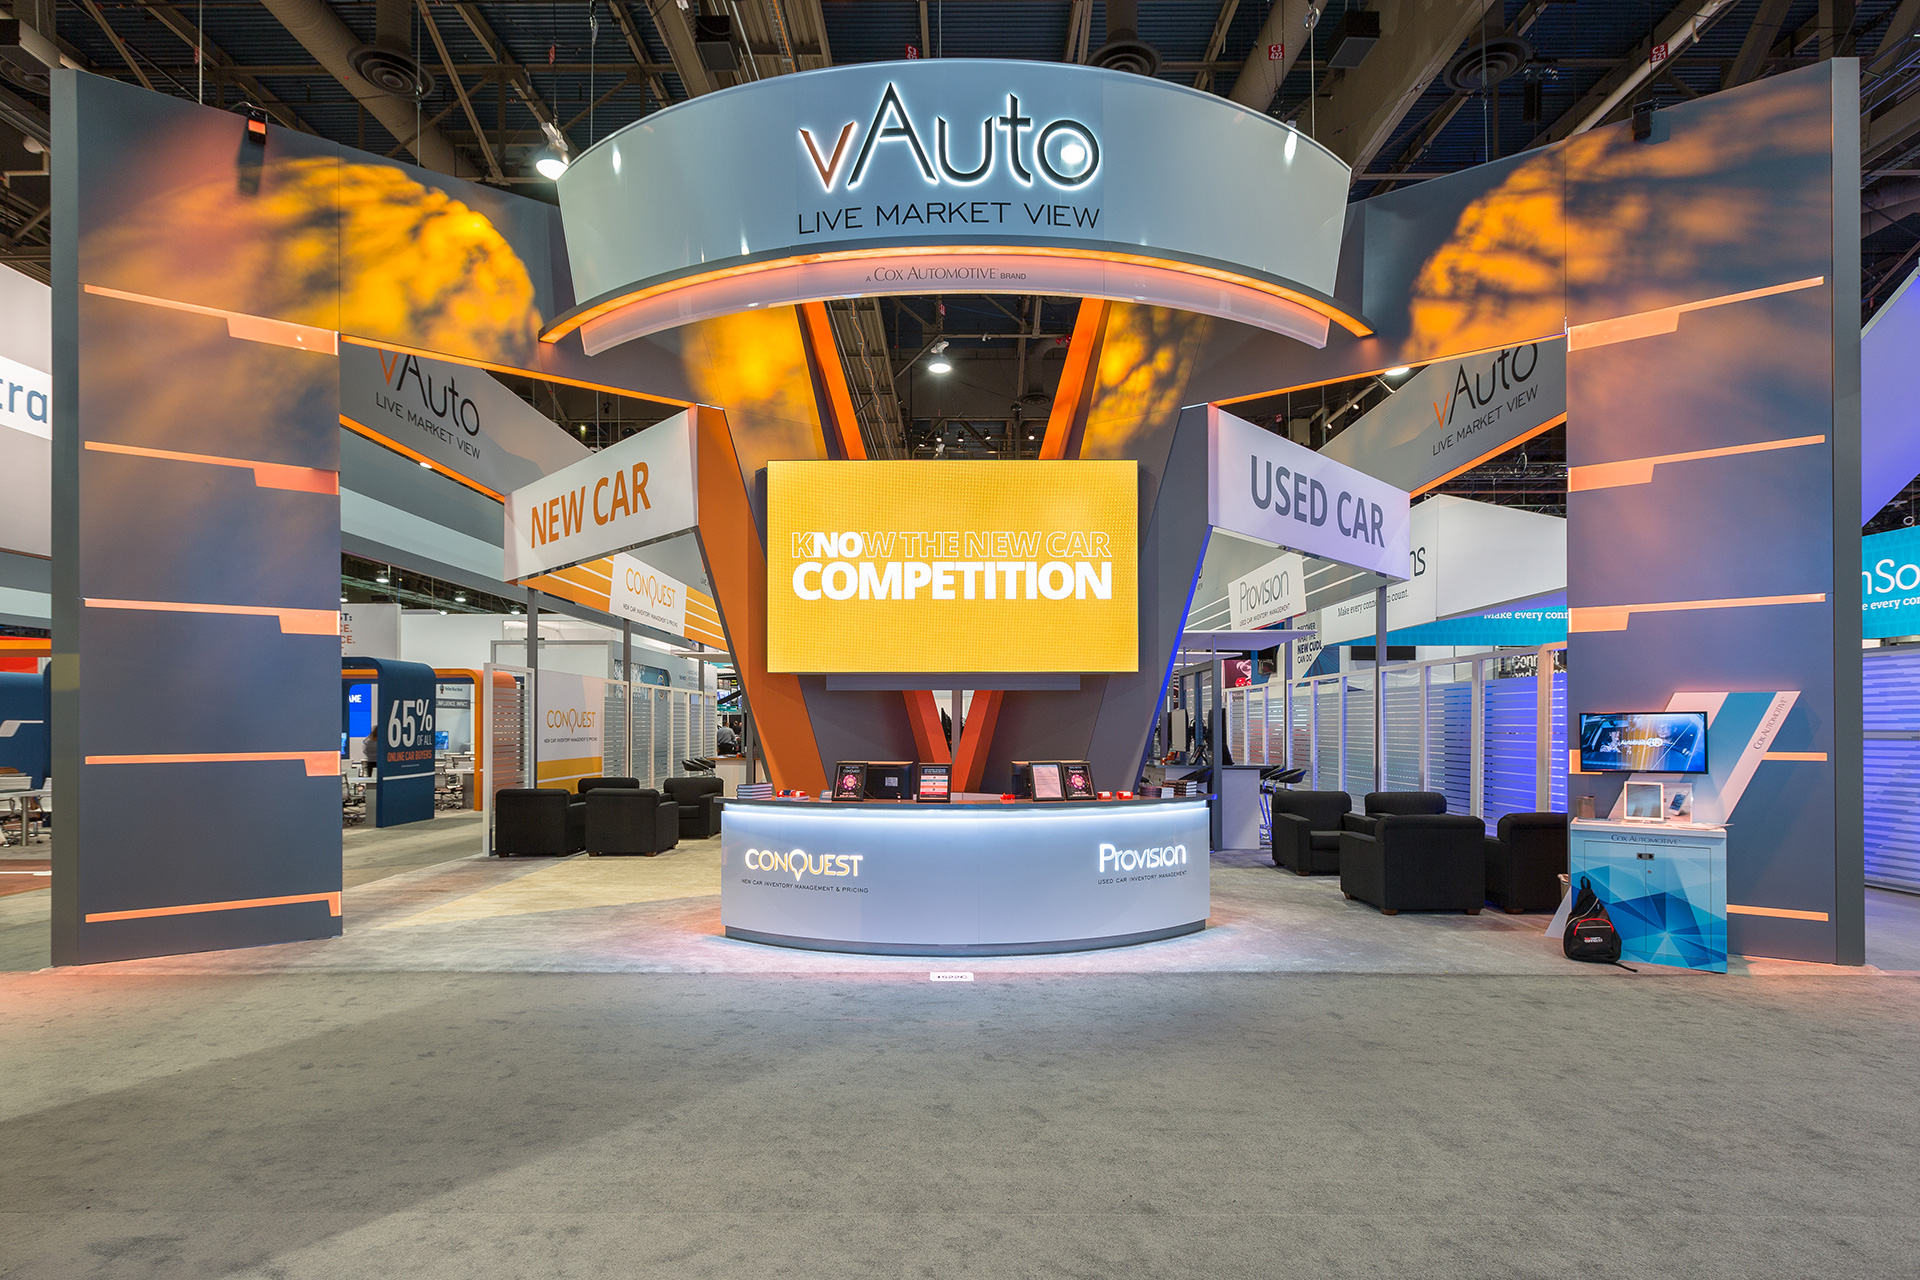 Grey and orange arch elements extending forward from a v-shaped centerpiece with a illunimated welcome counter and vAuto logo suspended above and an orange video screen directly center.